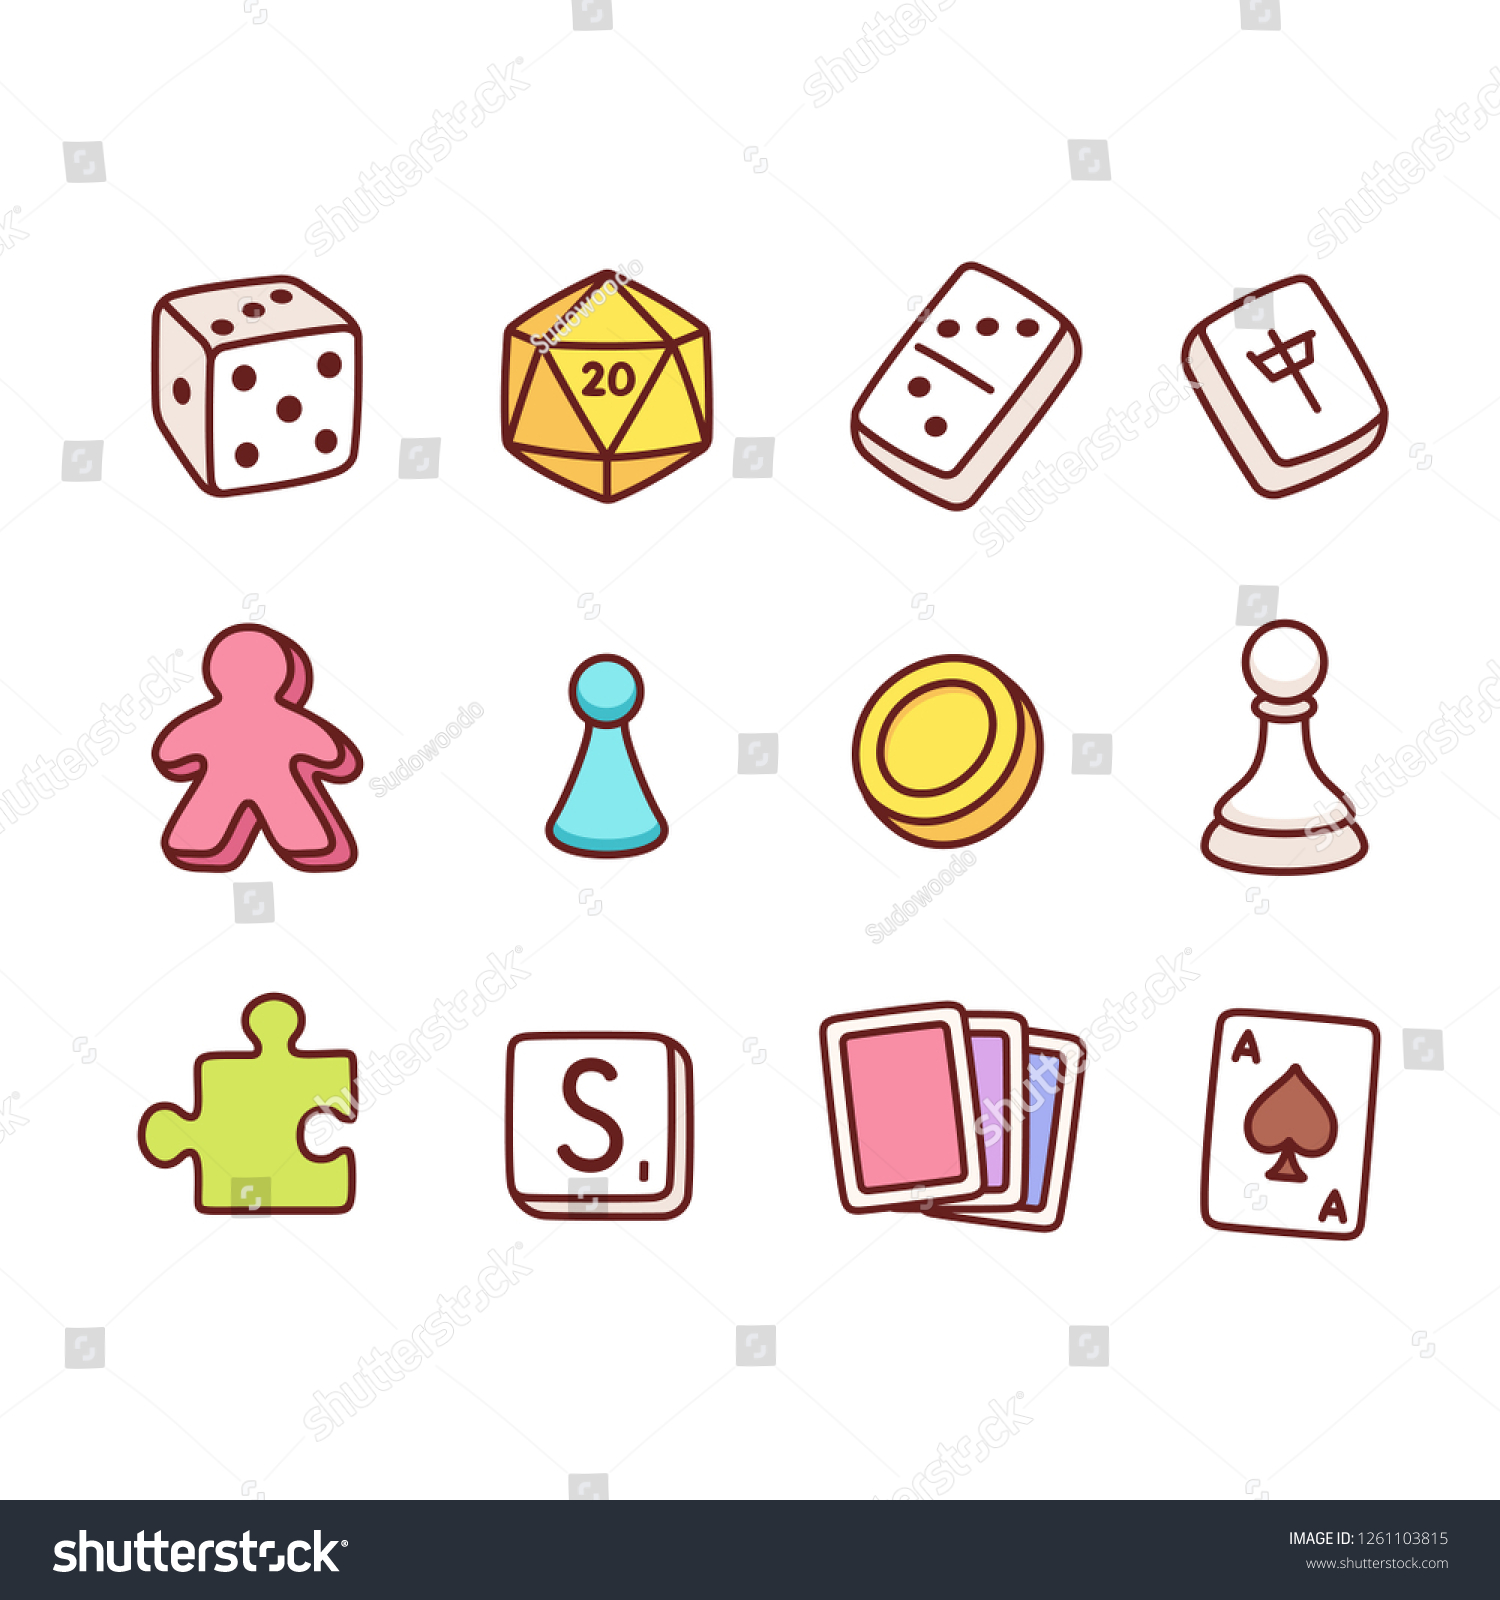 SVG of Board game icons in hand drawn cartoon style. Dice and play pieces, markers and cards. Vector clip art illustration. svg